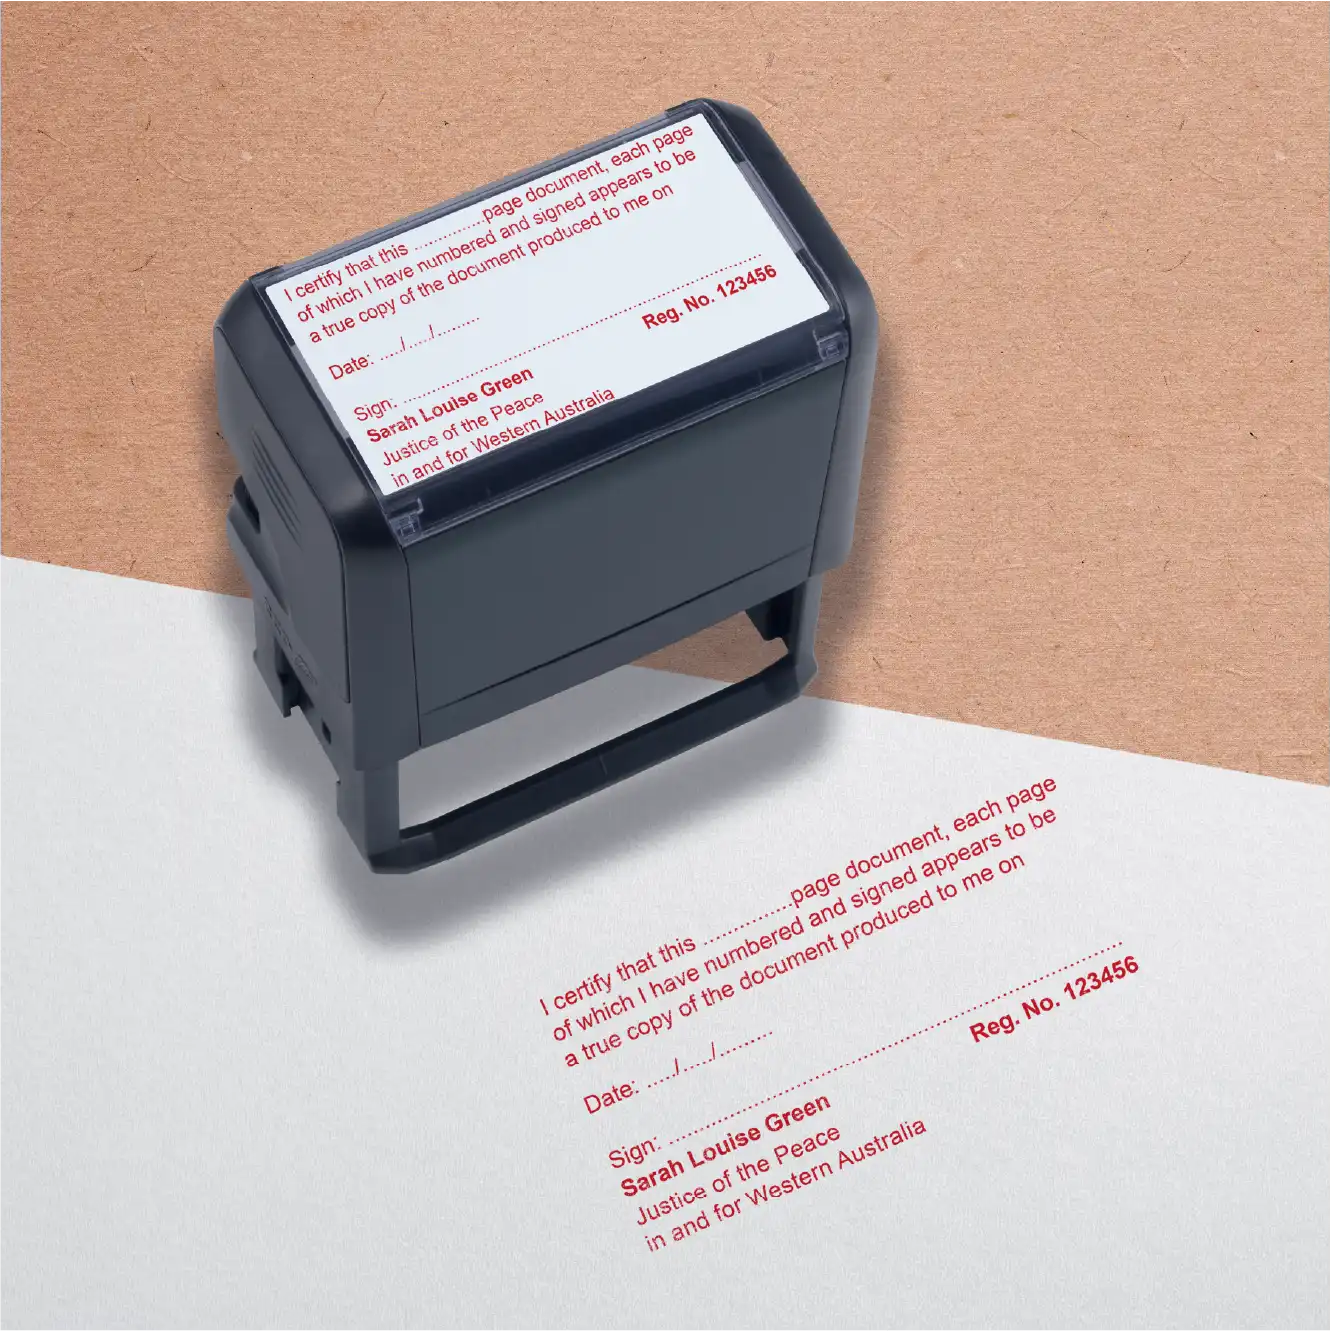 WA Justice of the peace Rubber stamp for witnessing multi page documents